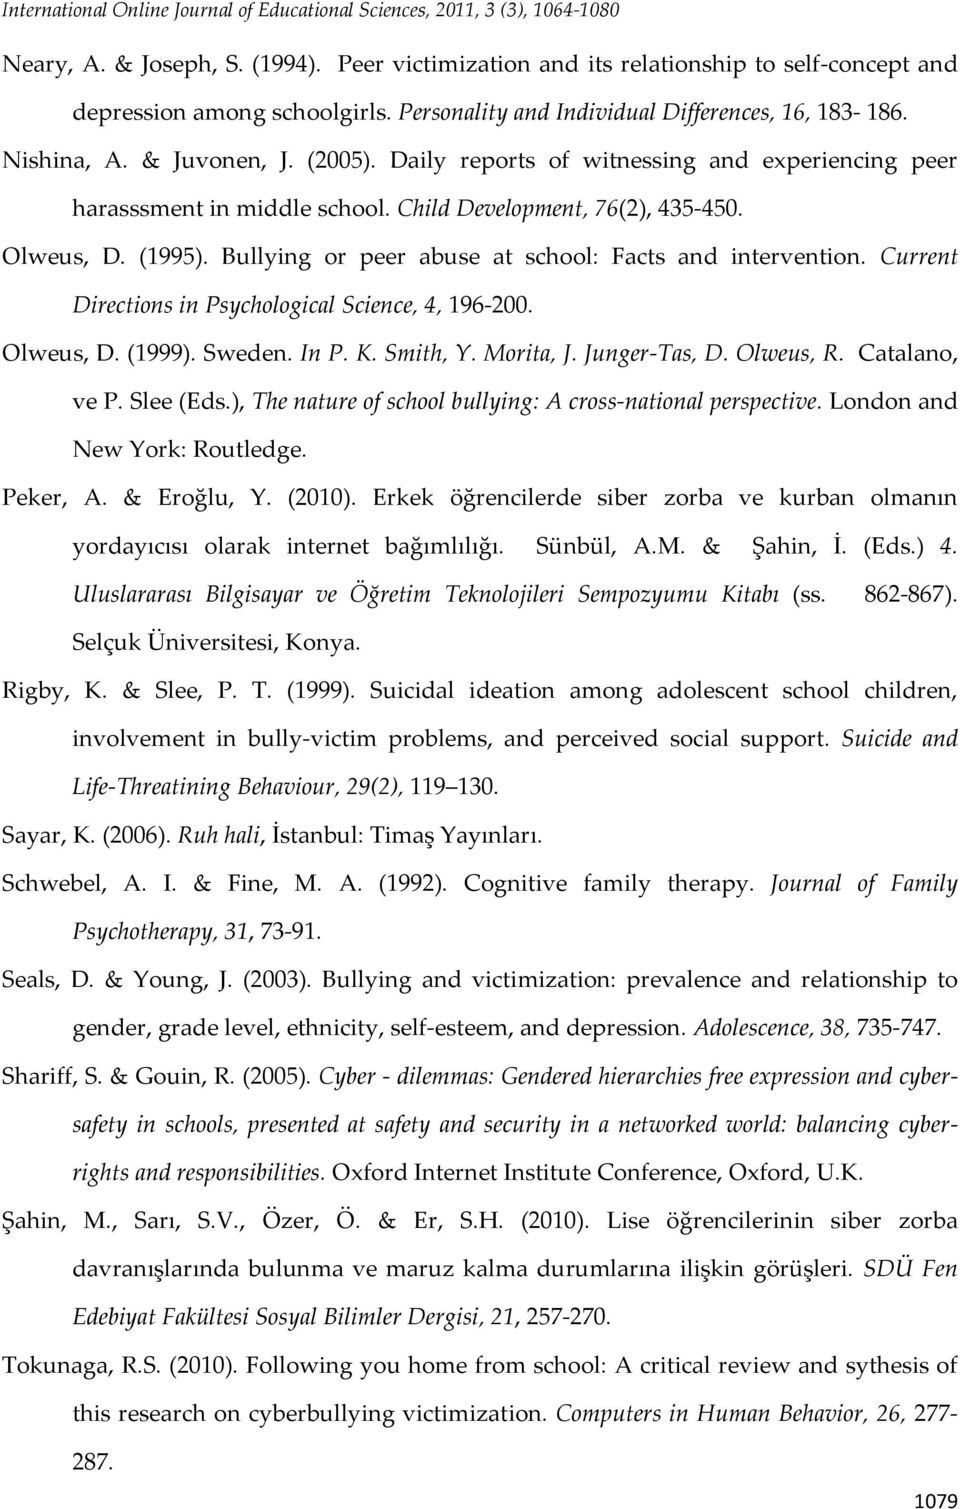 Child Development, 76(2), 435-450. Olweus, D. (1995). Bullying or peer abuse at school: Facts and intervention. Current Directions in Psychological Science, 4, 196-200. Olweus, D. (1999). Sweden.